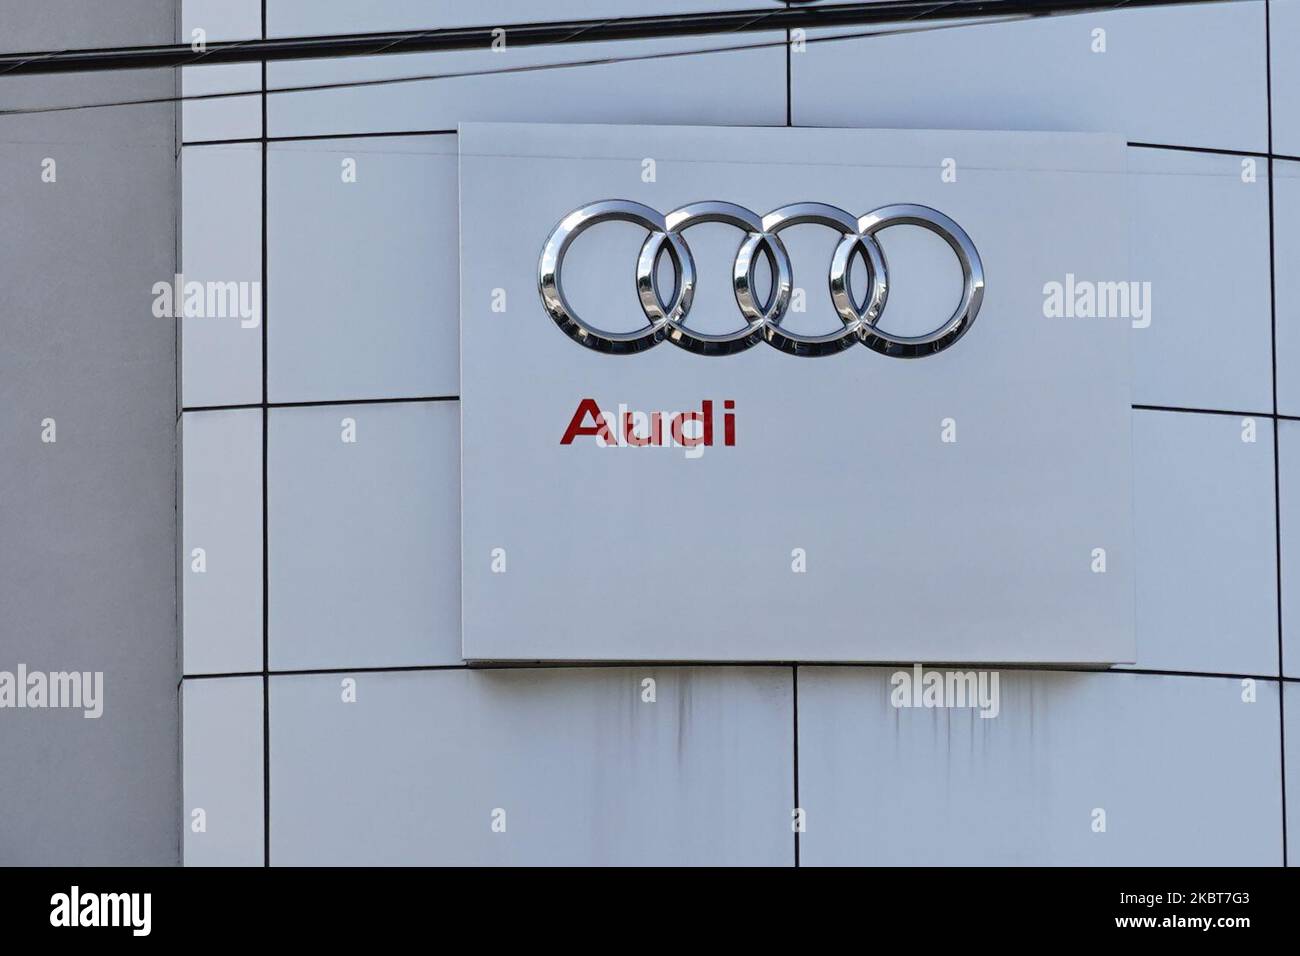 A view of Audi dealership in Queens, New York, USA., on July 4, 2020. (Photo by John Nacion/NurPhoto) Stock Photo